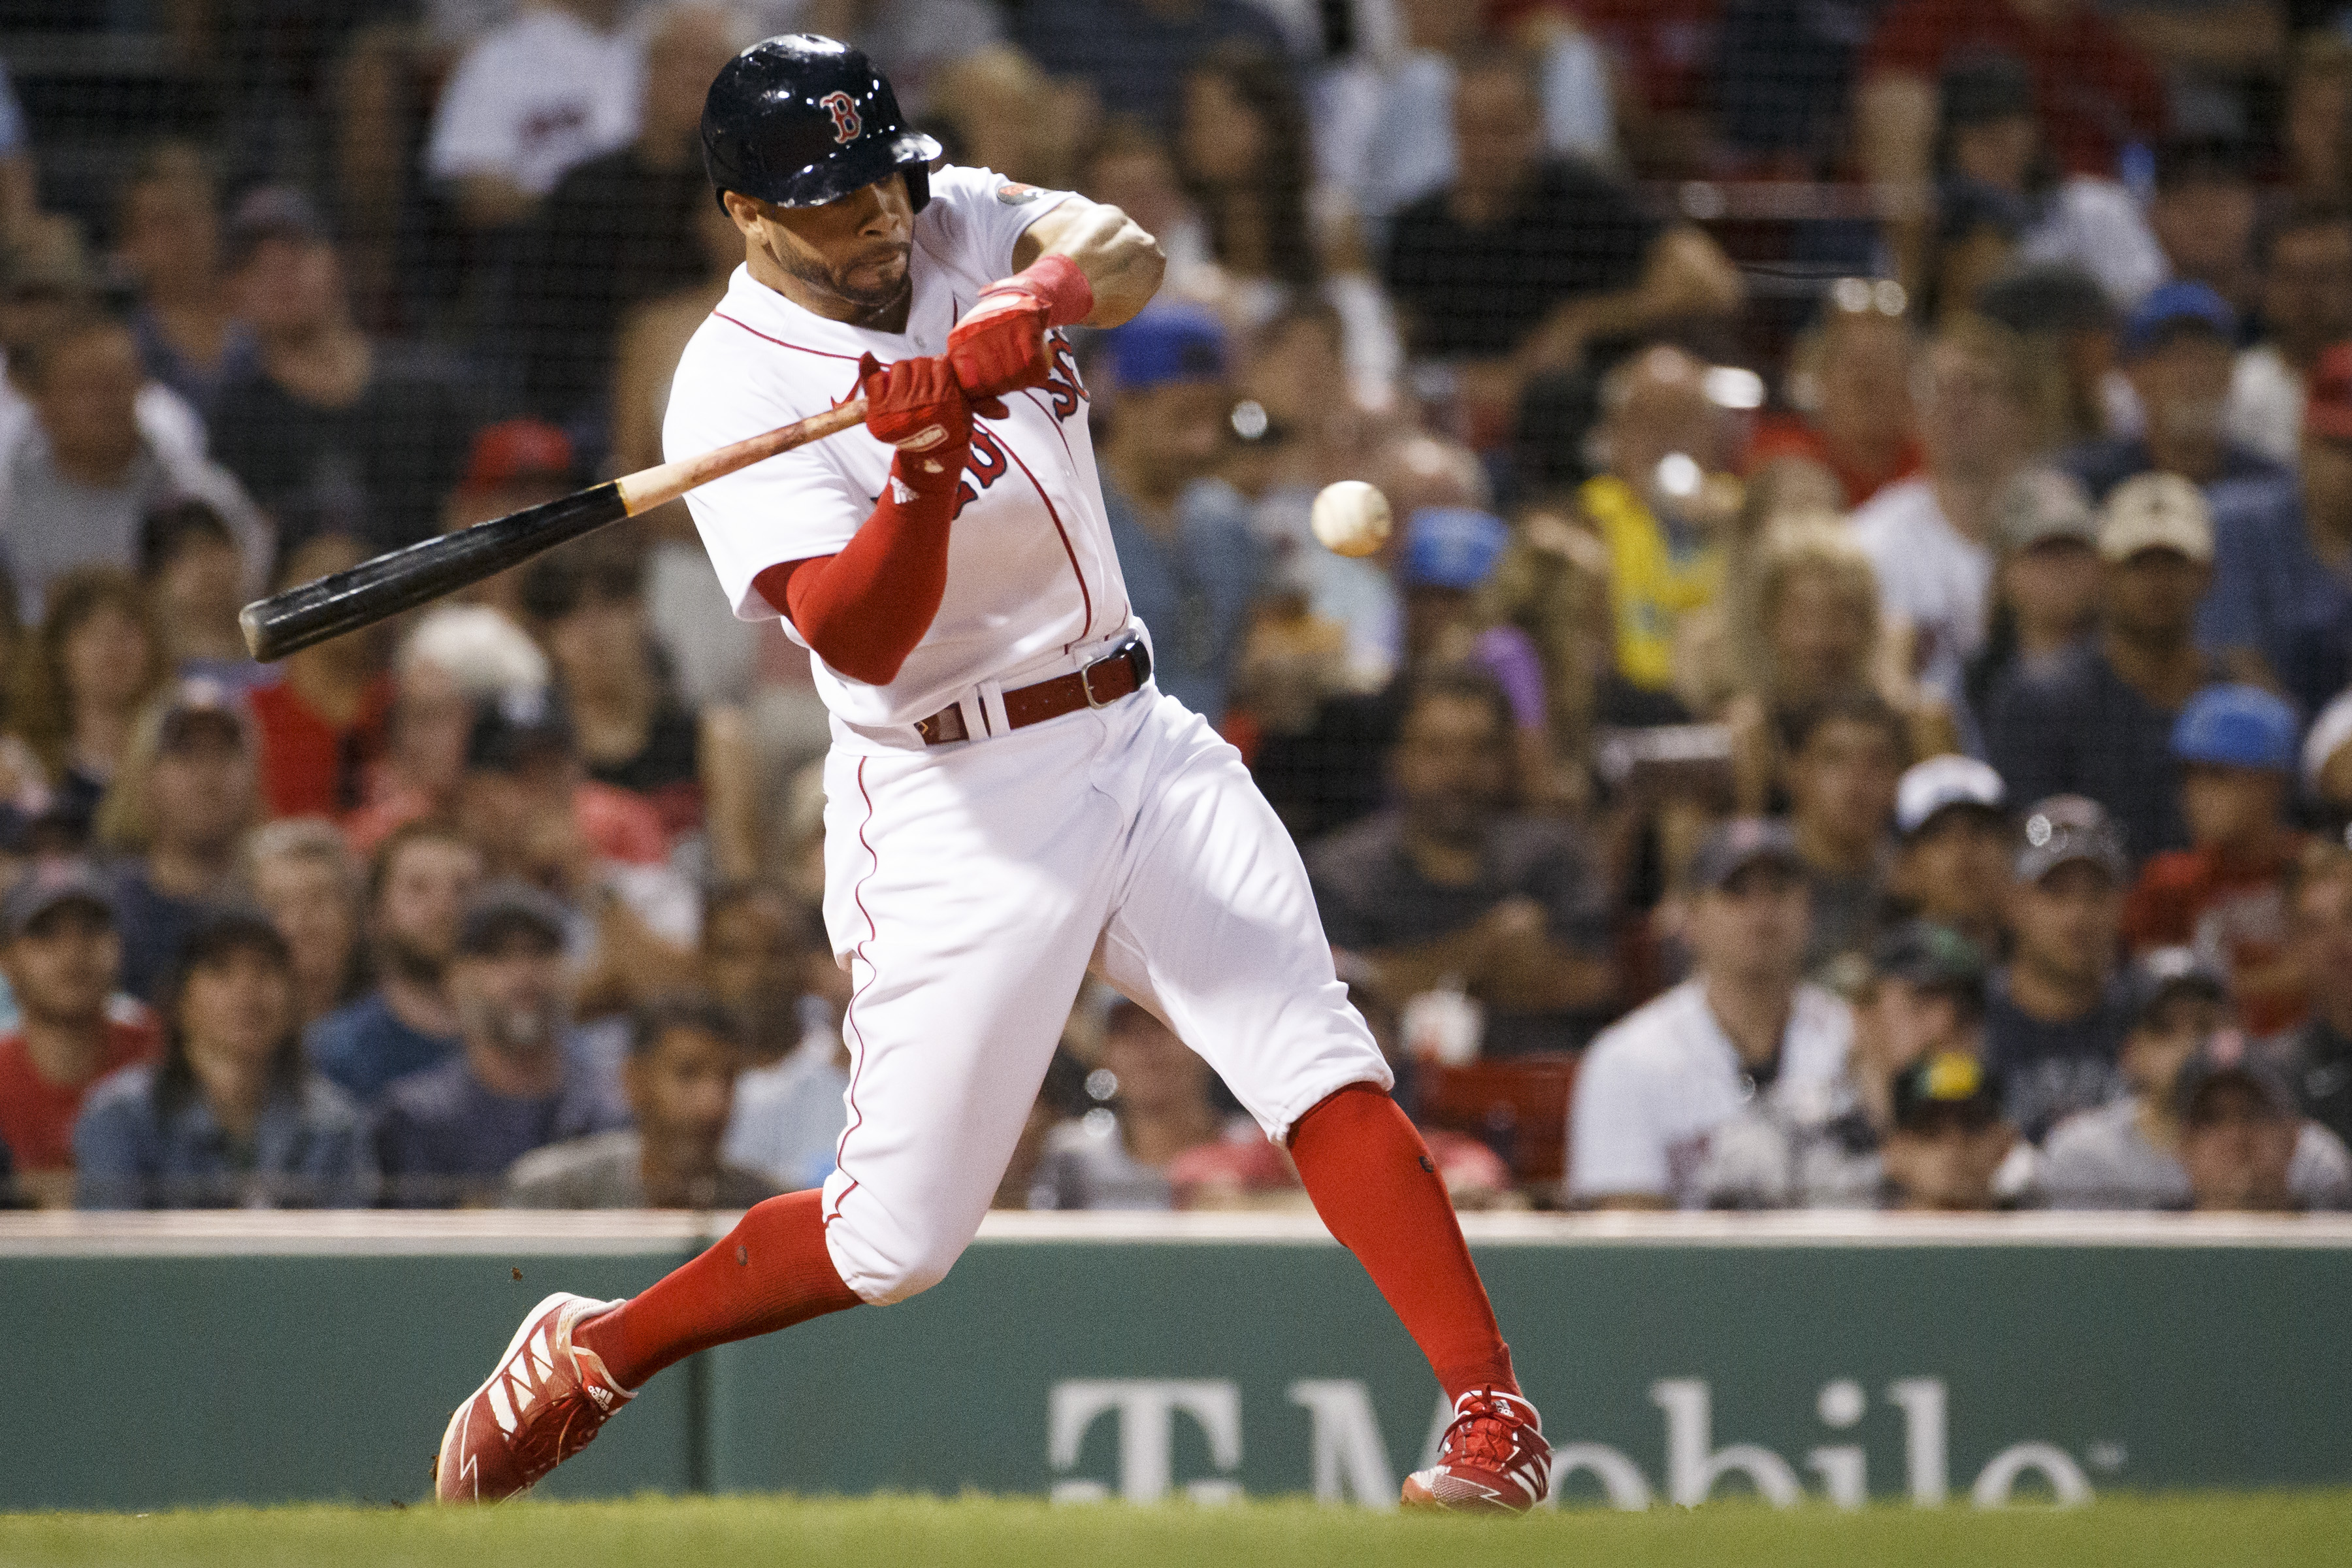 It's been a tough season for Red Sox outfielder Tommy Pham, but as always,  he battles on - The Boston Globe